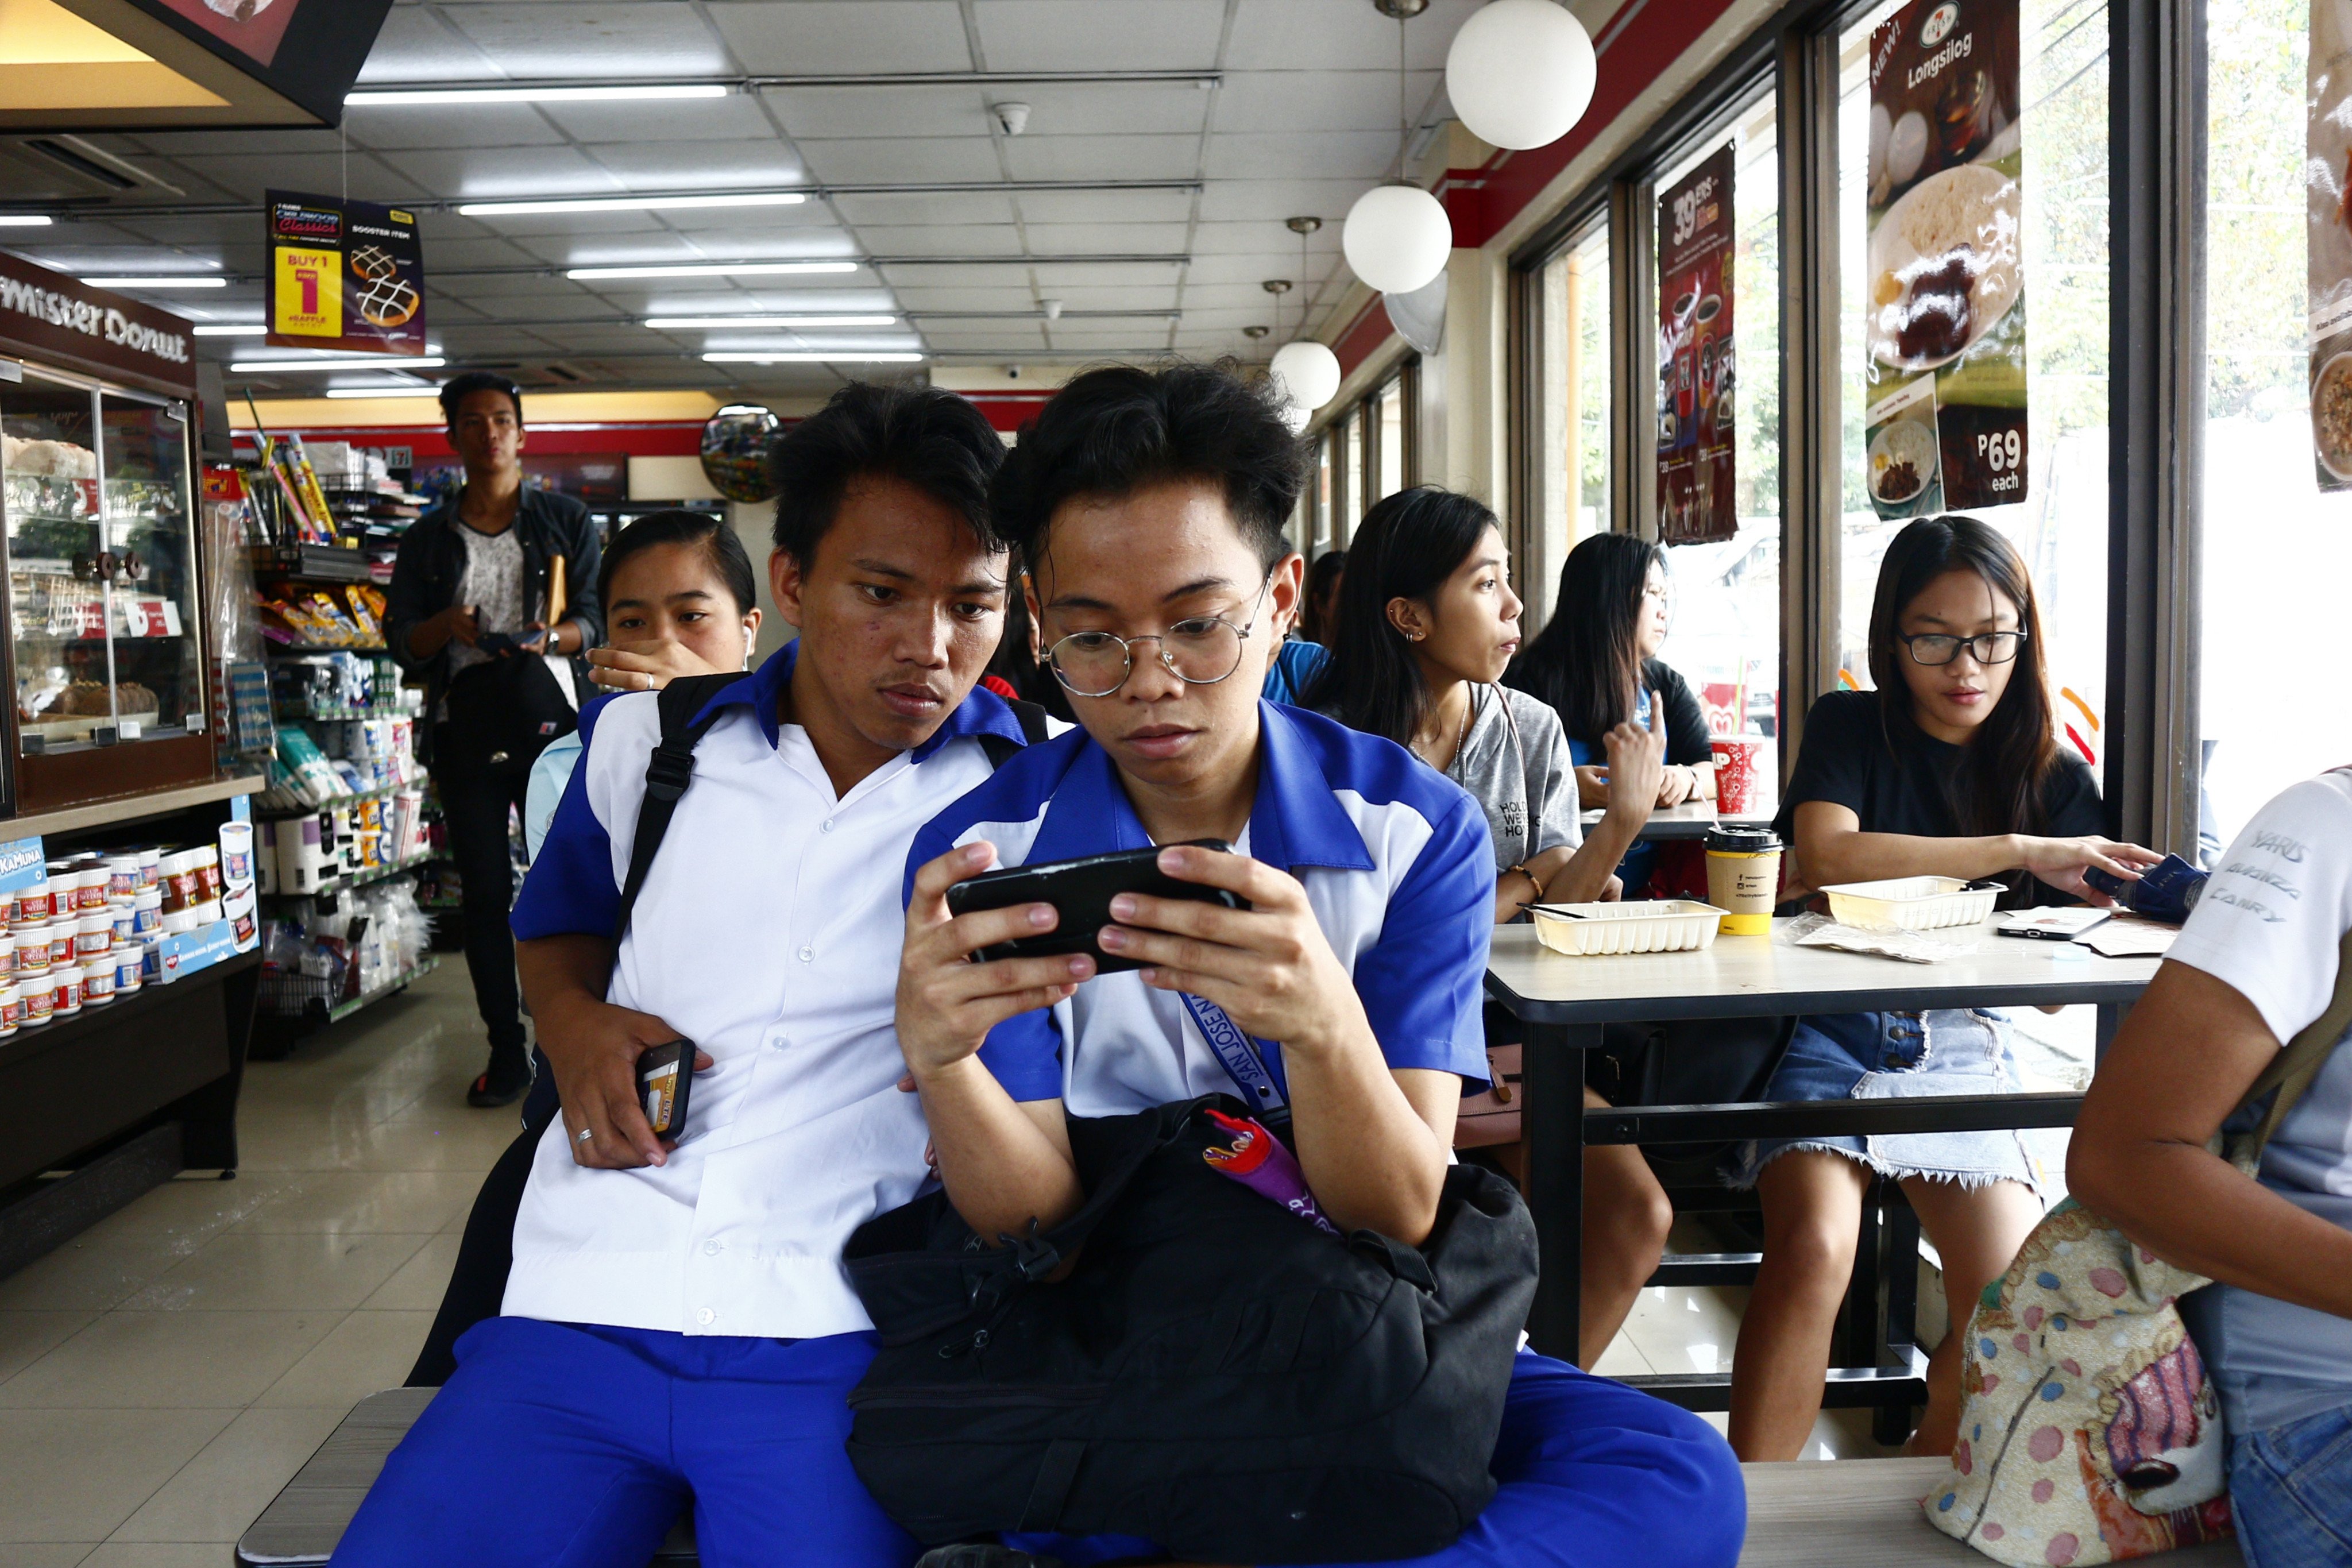 Filipino teenagers look at a smartphone at a convenience store. Photo: Shutterstock